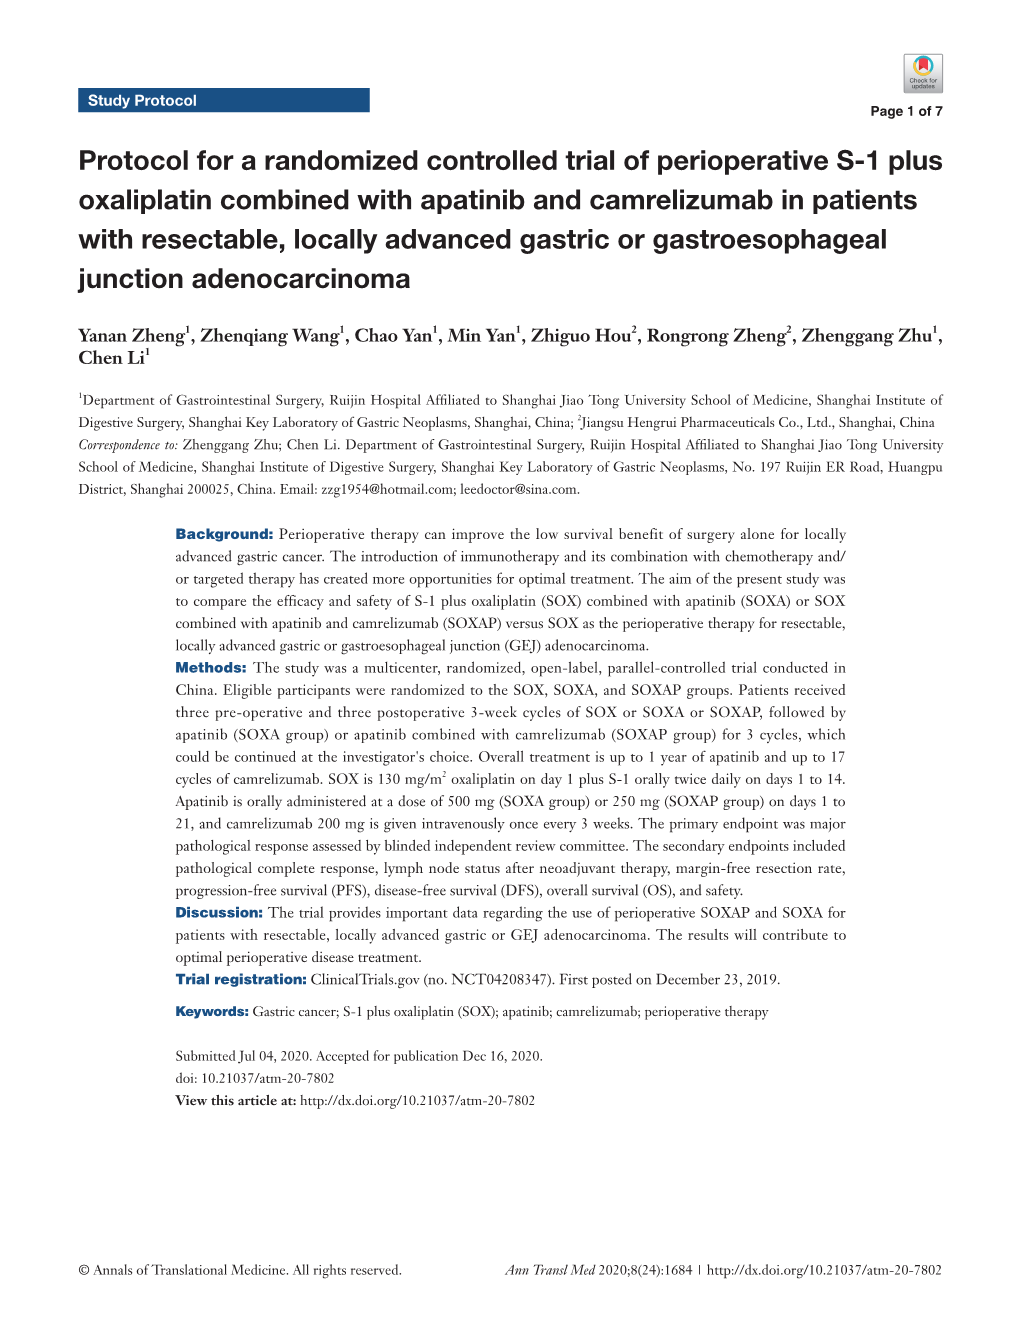 Protocol for a Randomized Controlled Trial of Perioperative S-1 Plus